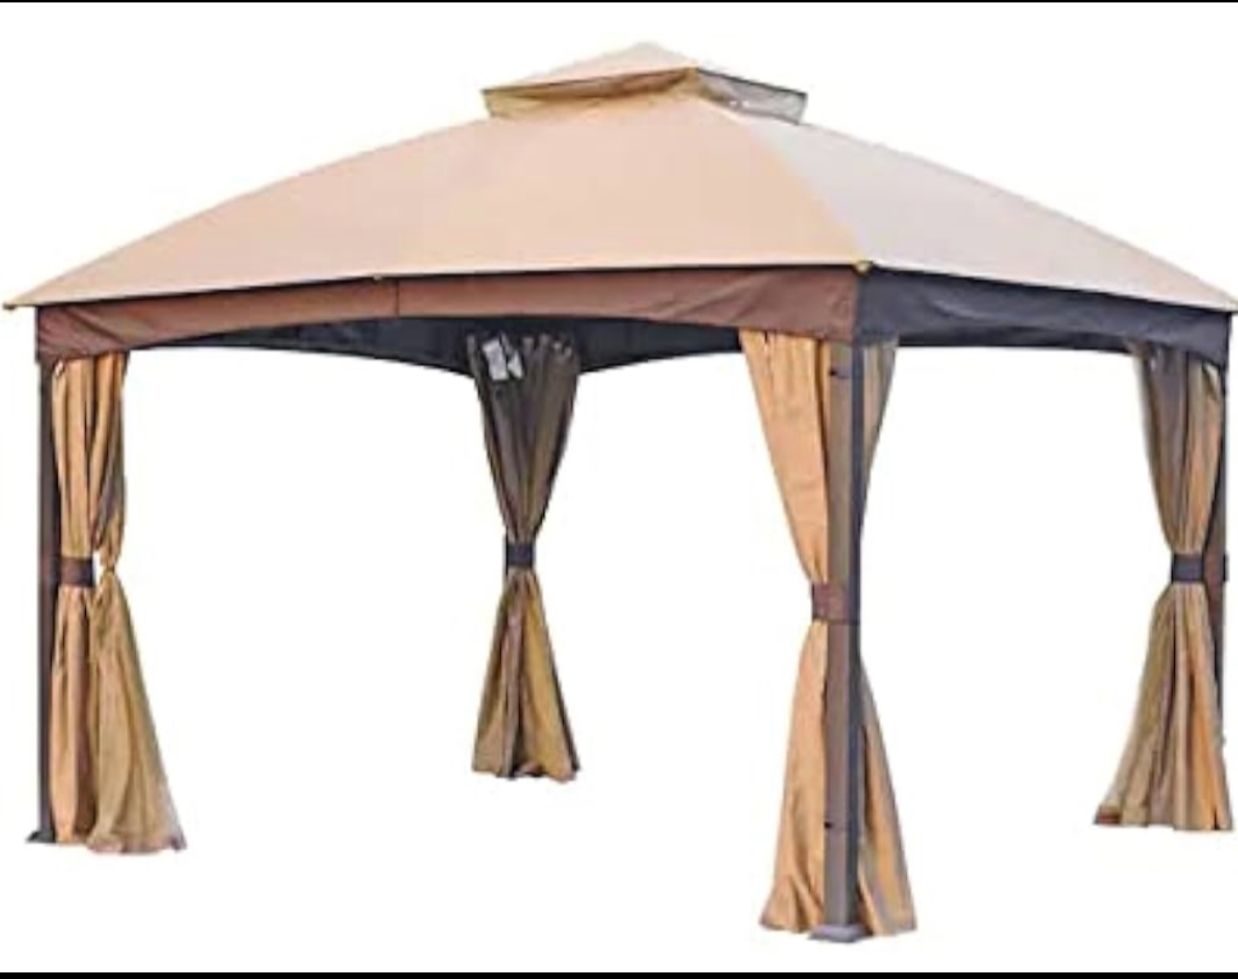 Replacement Canopy Premium Top 30170 Lowe's Allen & Roth 10' x 12' Gazebo